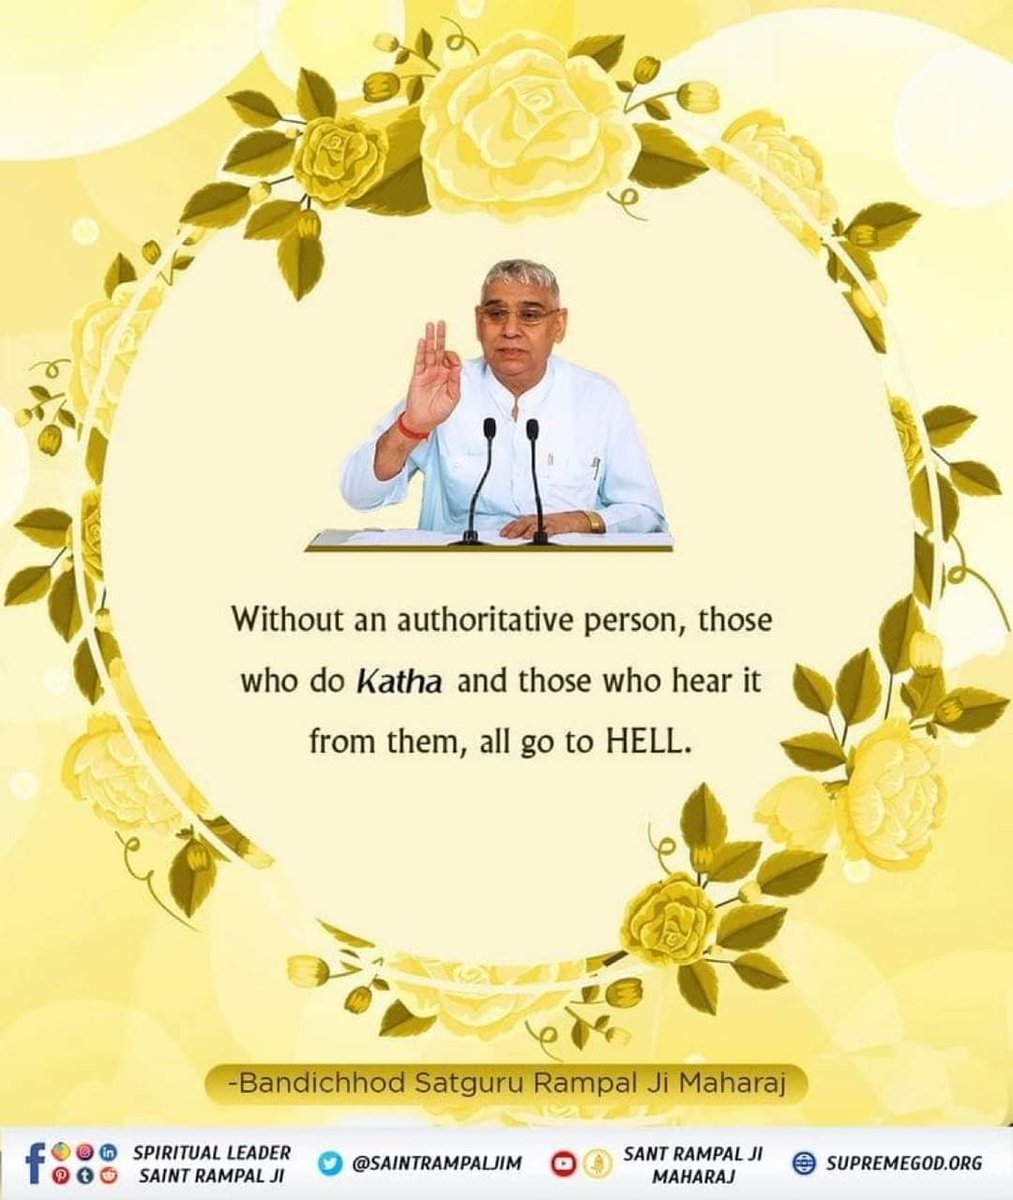 #GodMorningMonday
Without an authoritative person, those who do Katha and those who hear it from them, all go to
HELL.
~ Bandichhod SatGuru Rampal Ji Maharaj
Must Visit our Satlok Ashram YouTube Channel for More Information
#MondayMotivation